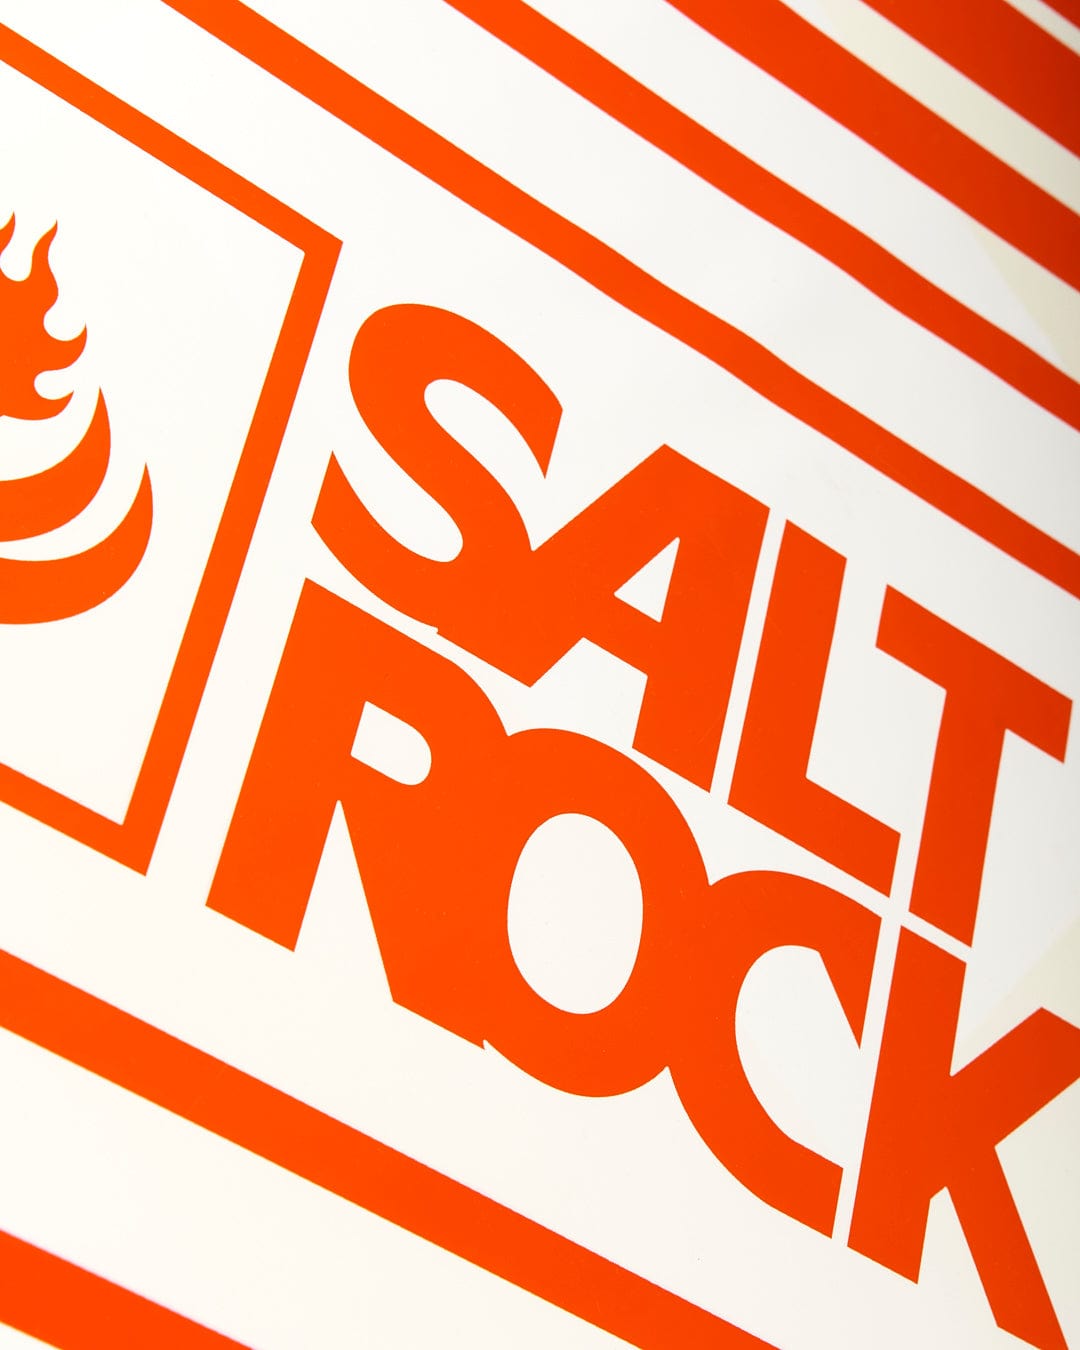 The Soul Stream 41" Bodyboard - Red logo is shown on an orange and white background.